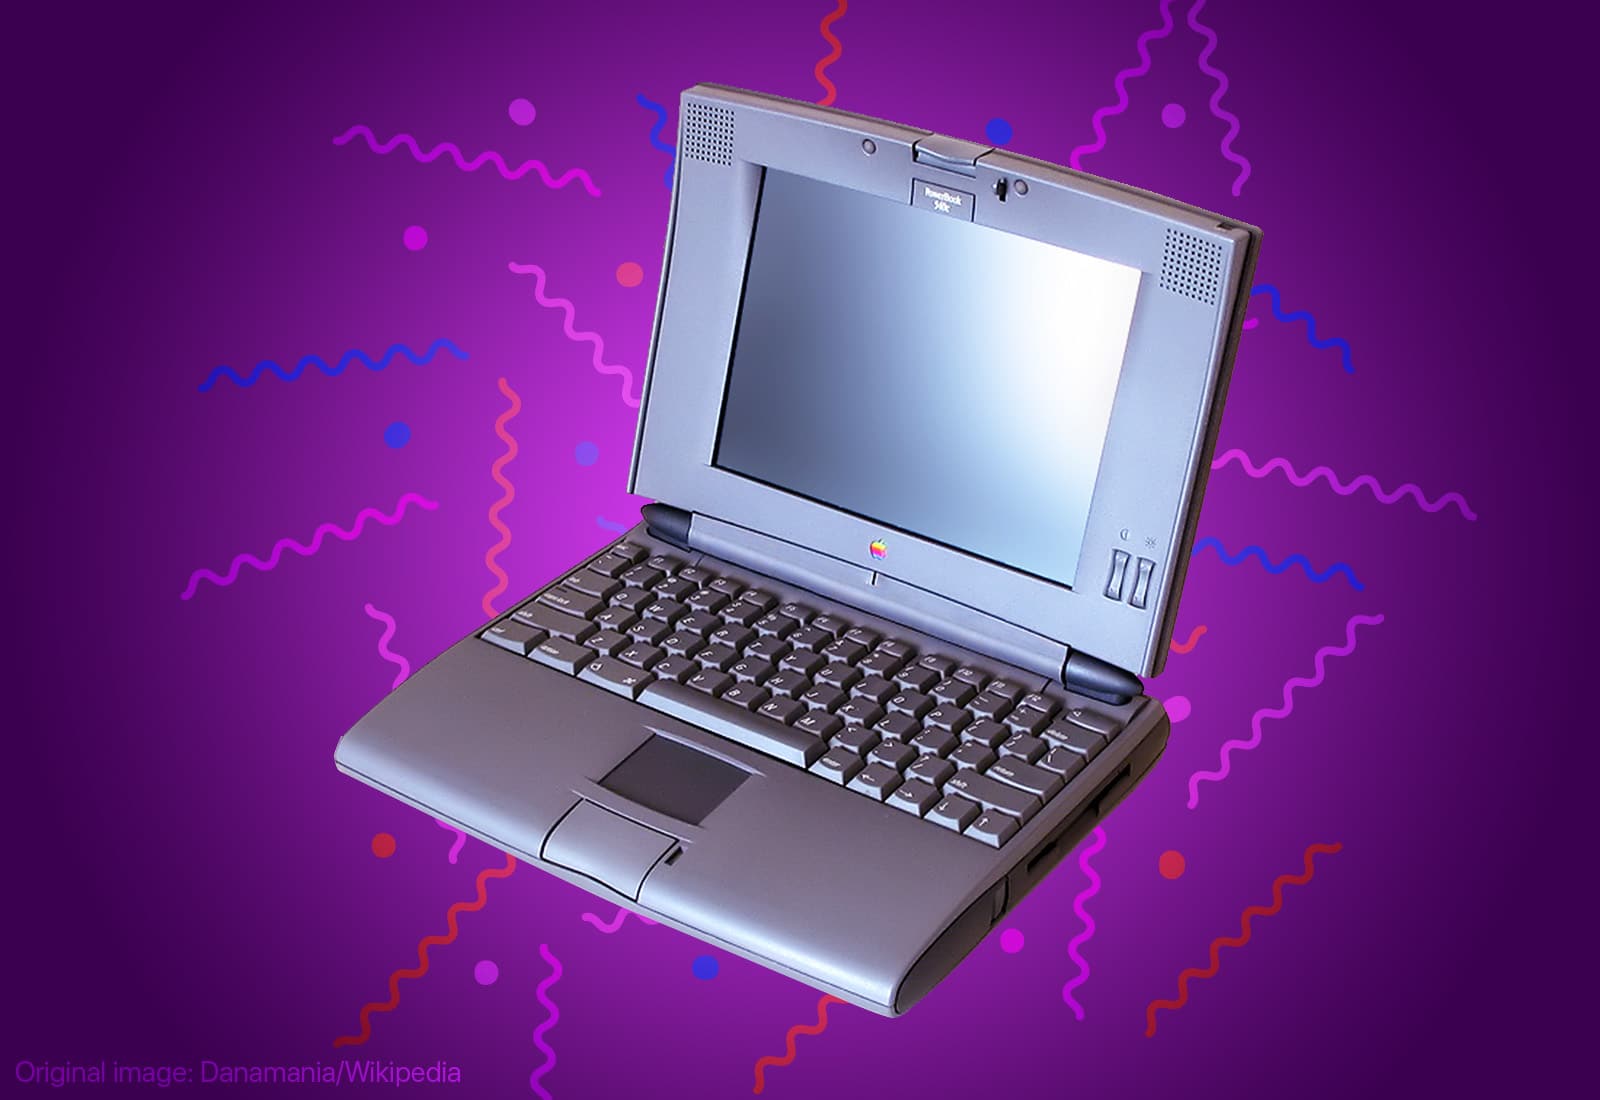 Today in Apple history: PowerBook 540c is the best Mac laptop so far